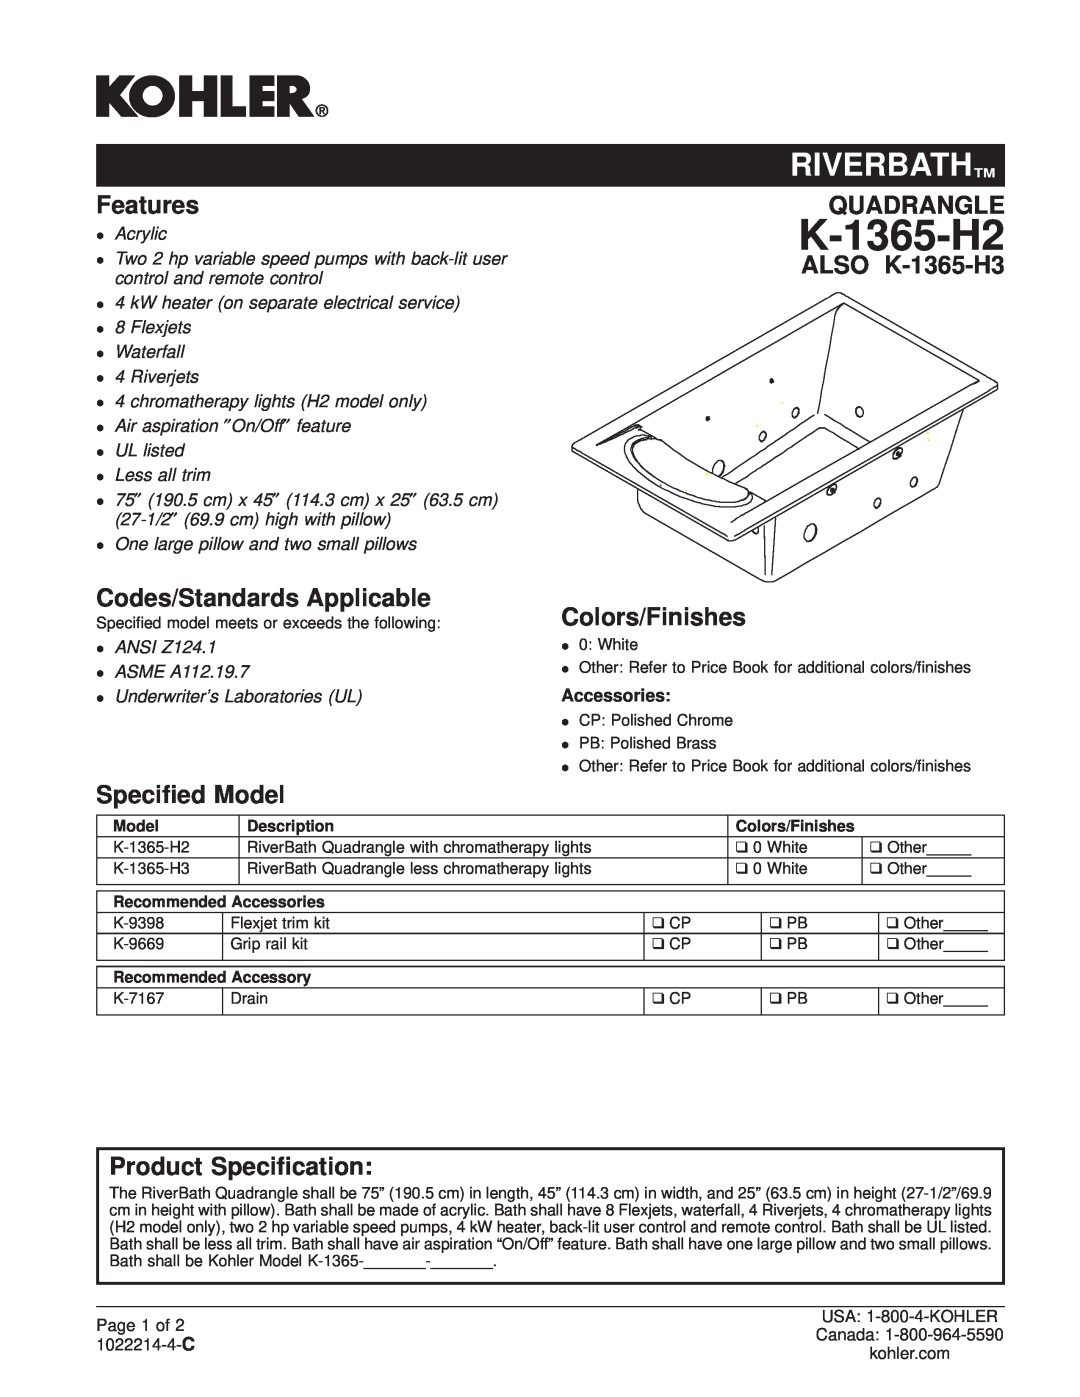 Kohler manual Riverbath, Features, Quadrangle, ALSO K-1365-H3, Codes/Standards Applicable, Specied Model, Accessories 